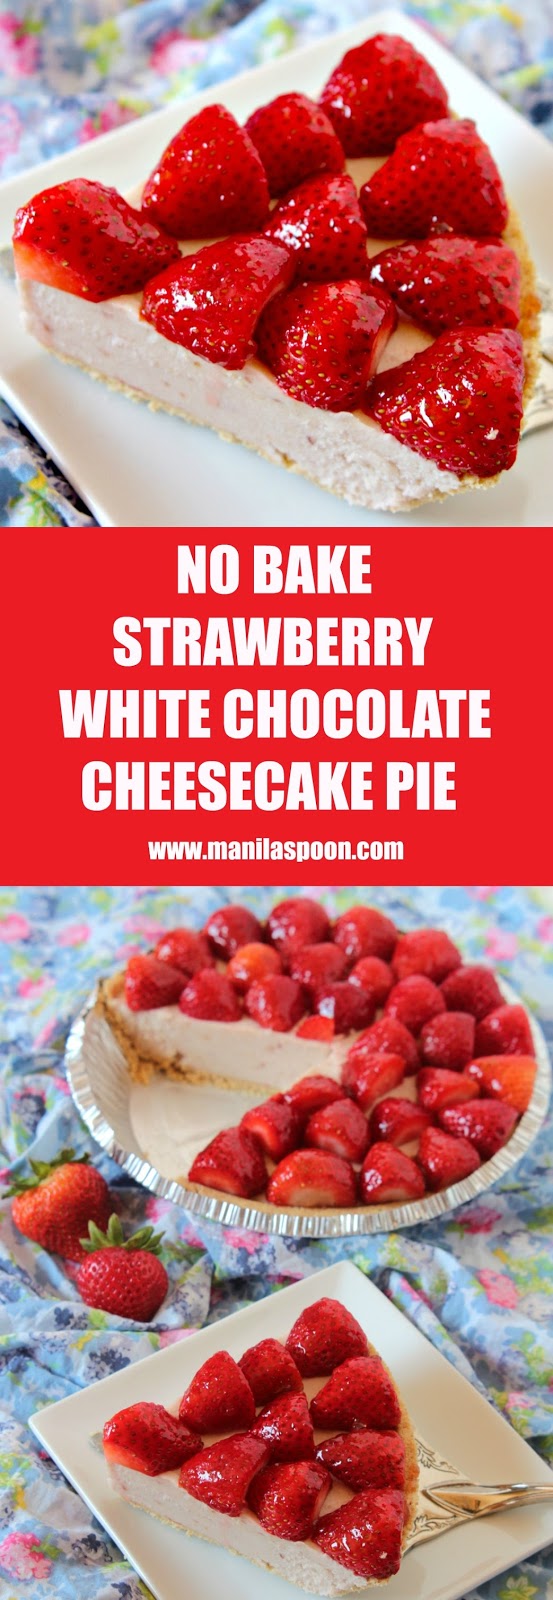 Glazed fresh and juicy strawberries and luscious white chocolate cheesecake make up this ultimate summer pie! NO BAKE, easy and delicious recipe that will make everyone happy!